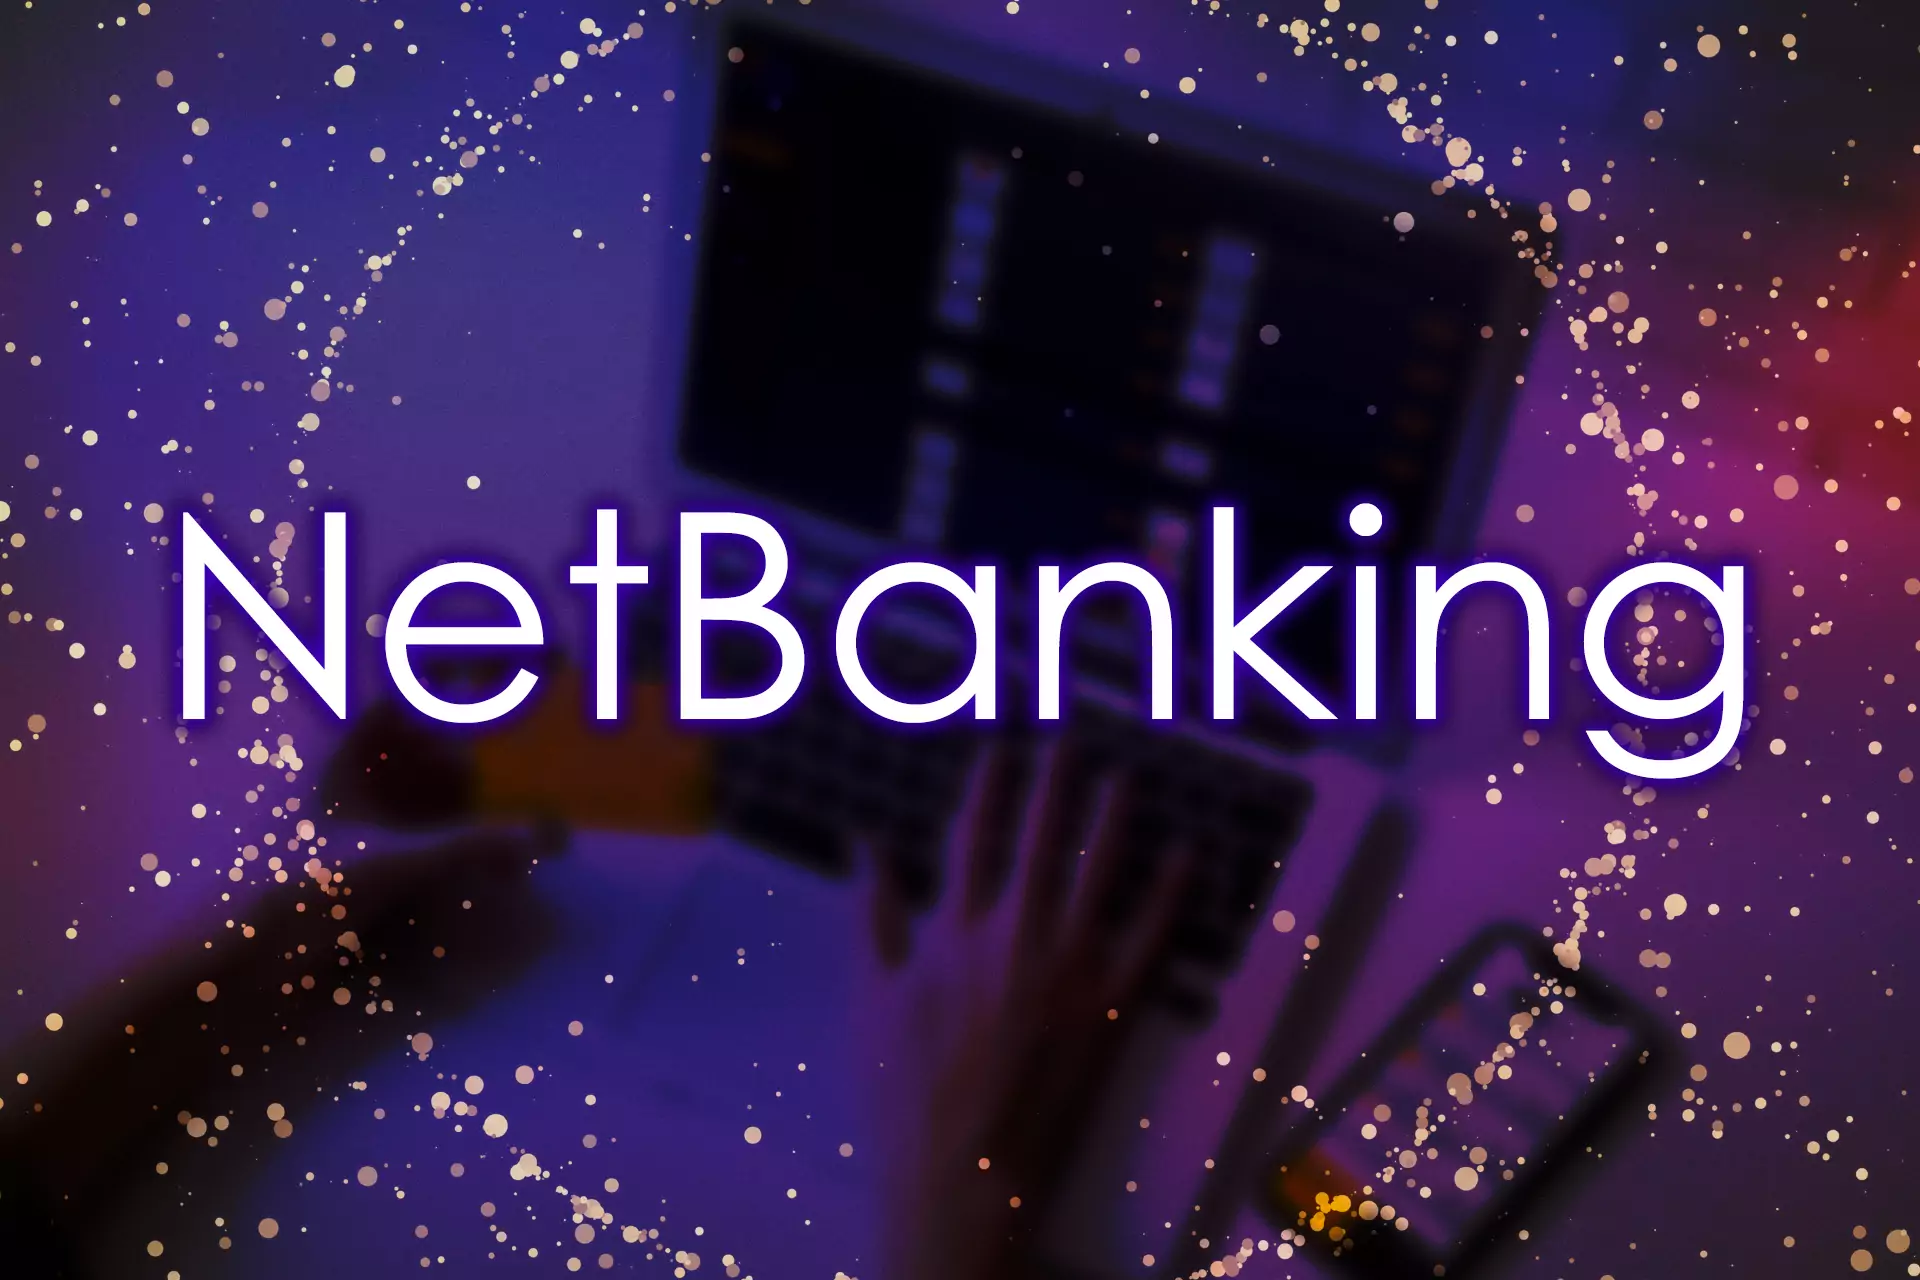 NetBanking is a modern feature of the majority of banks that allow transferring money online.